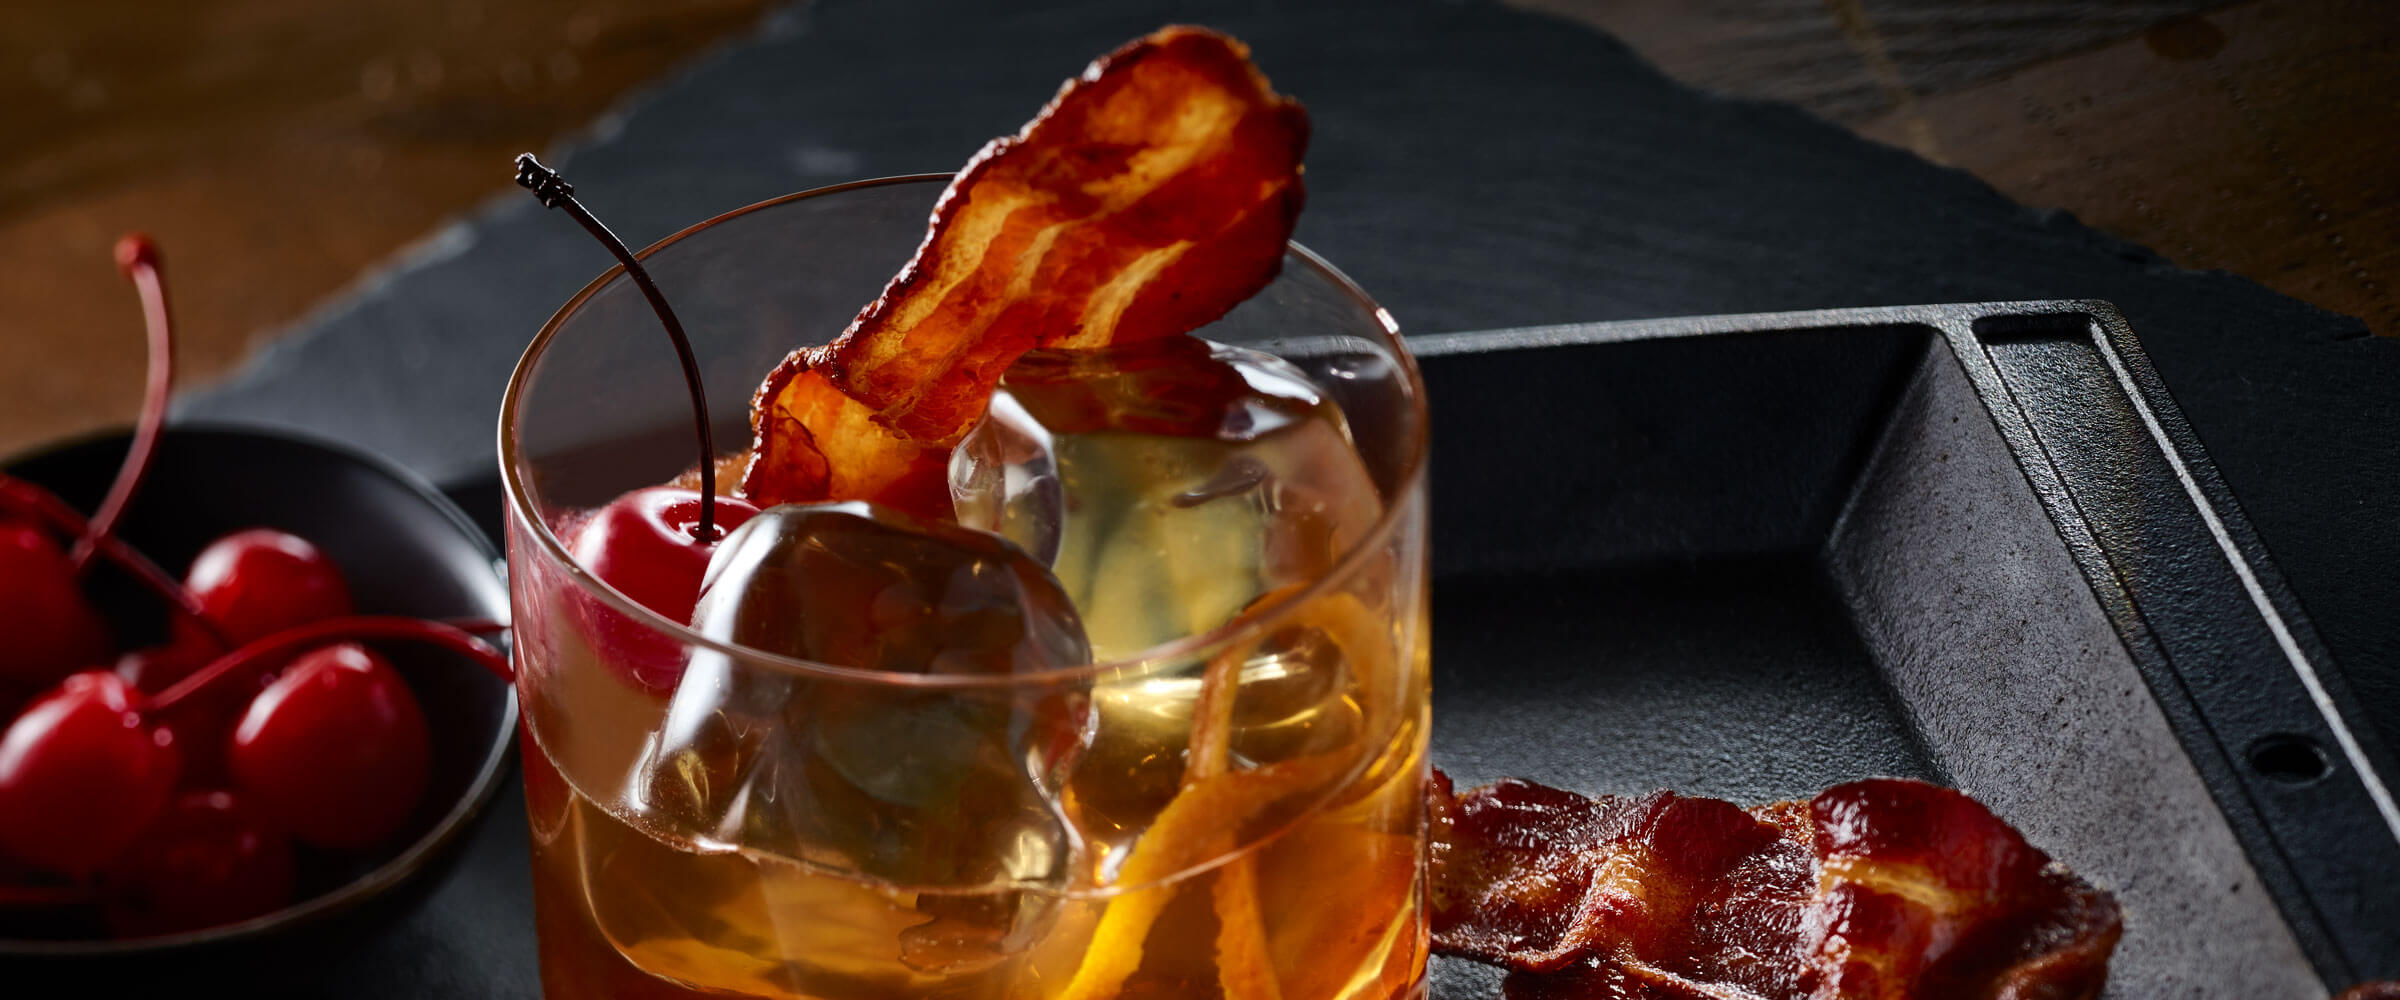 Cherrywood Bacon-Infused Manhattan in glass with cherry and bacon slide